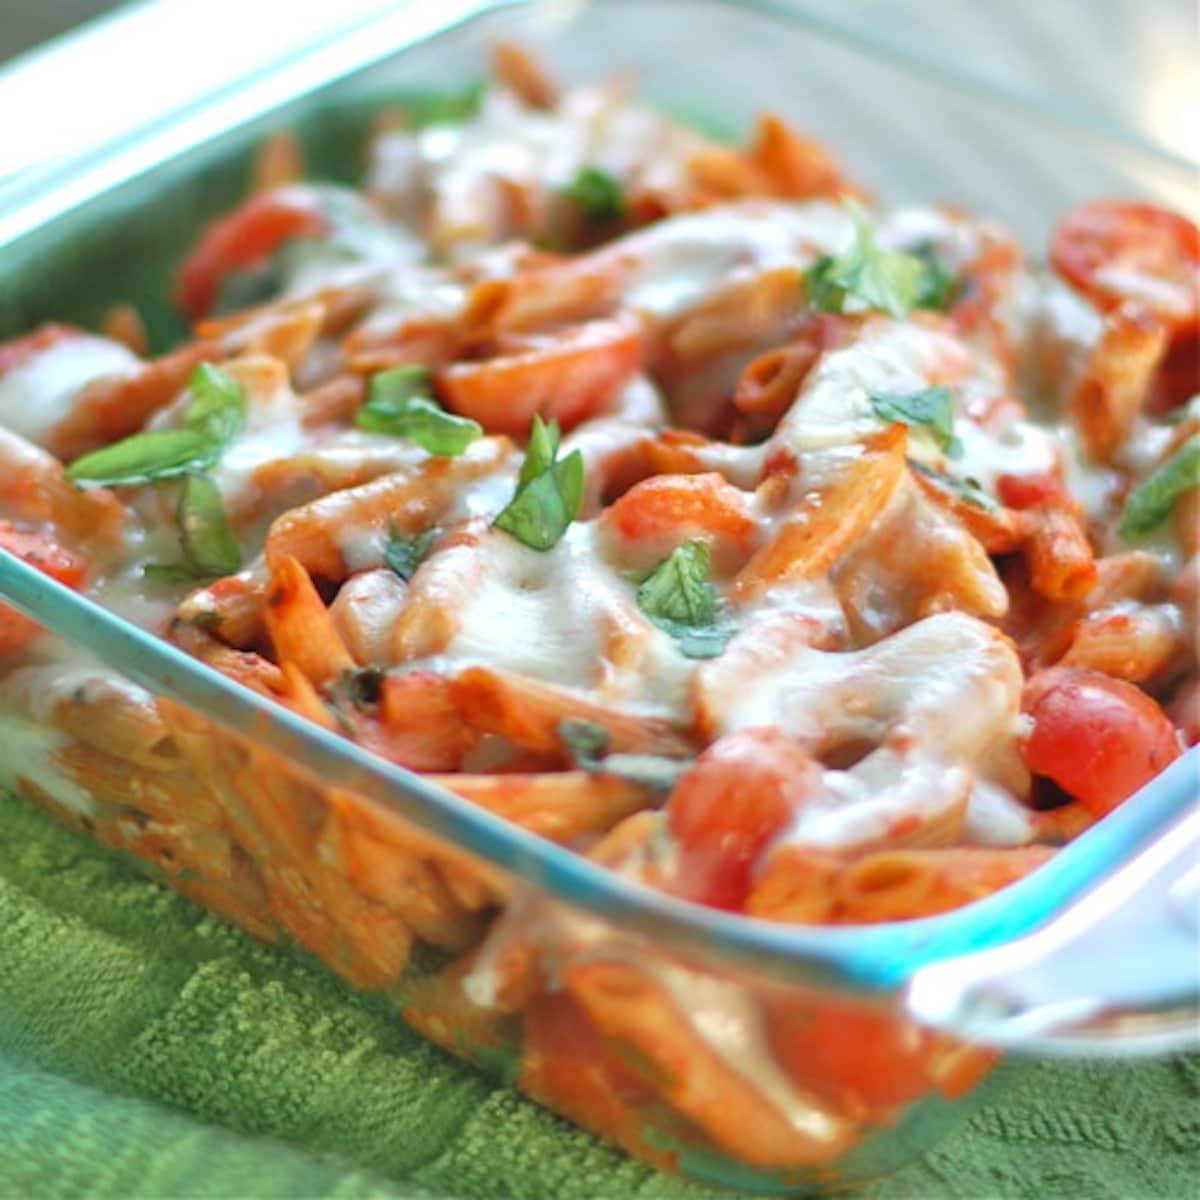 Vegetarian caprese penne pasta with sweet cherry tomatoes, mozzarella, and fresh basil in a clear baking dish.